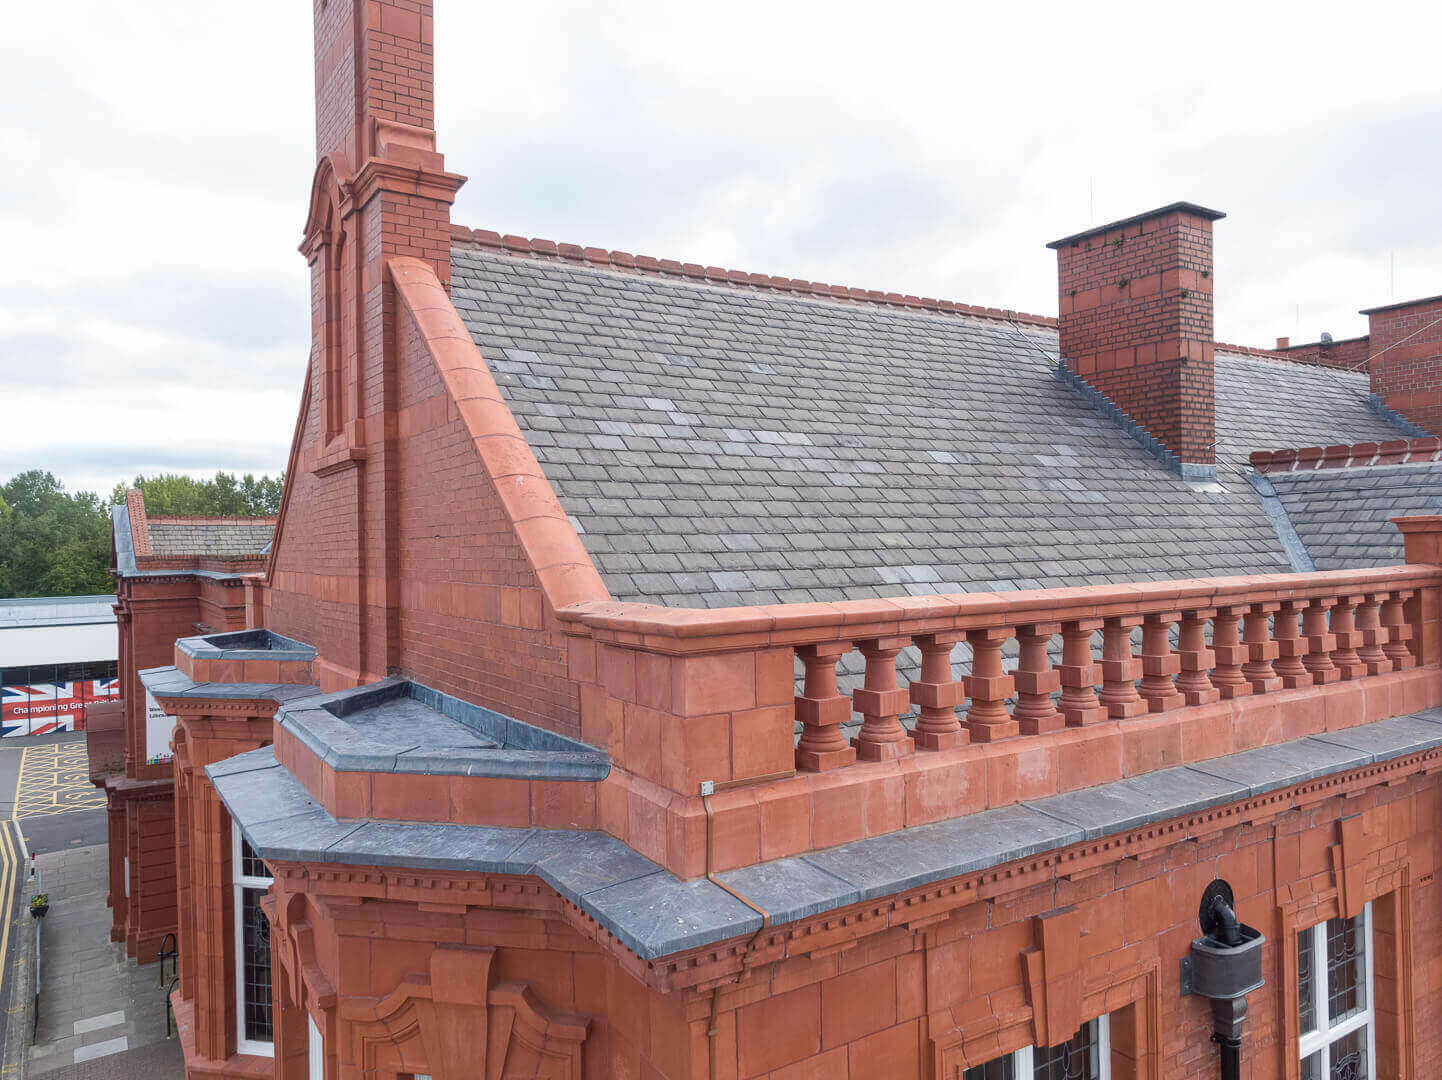 Aerial drone survey at Westhoughton Town Hall, Lancashire